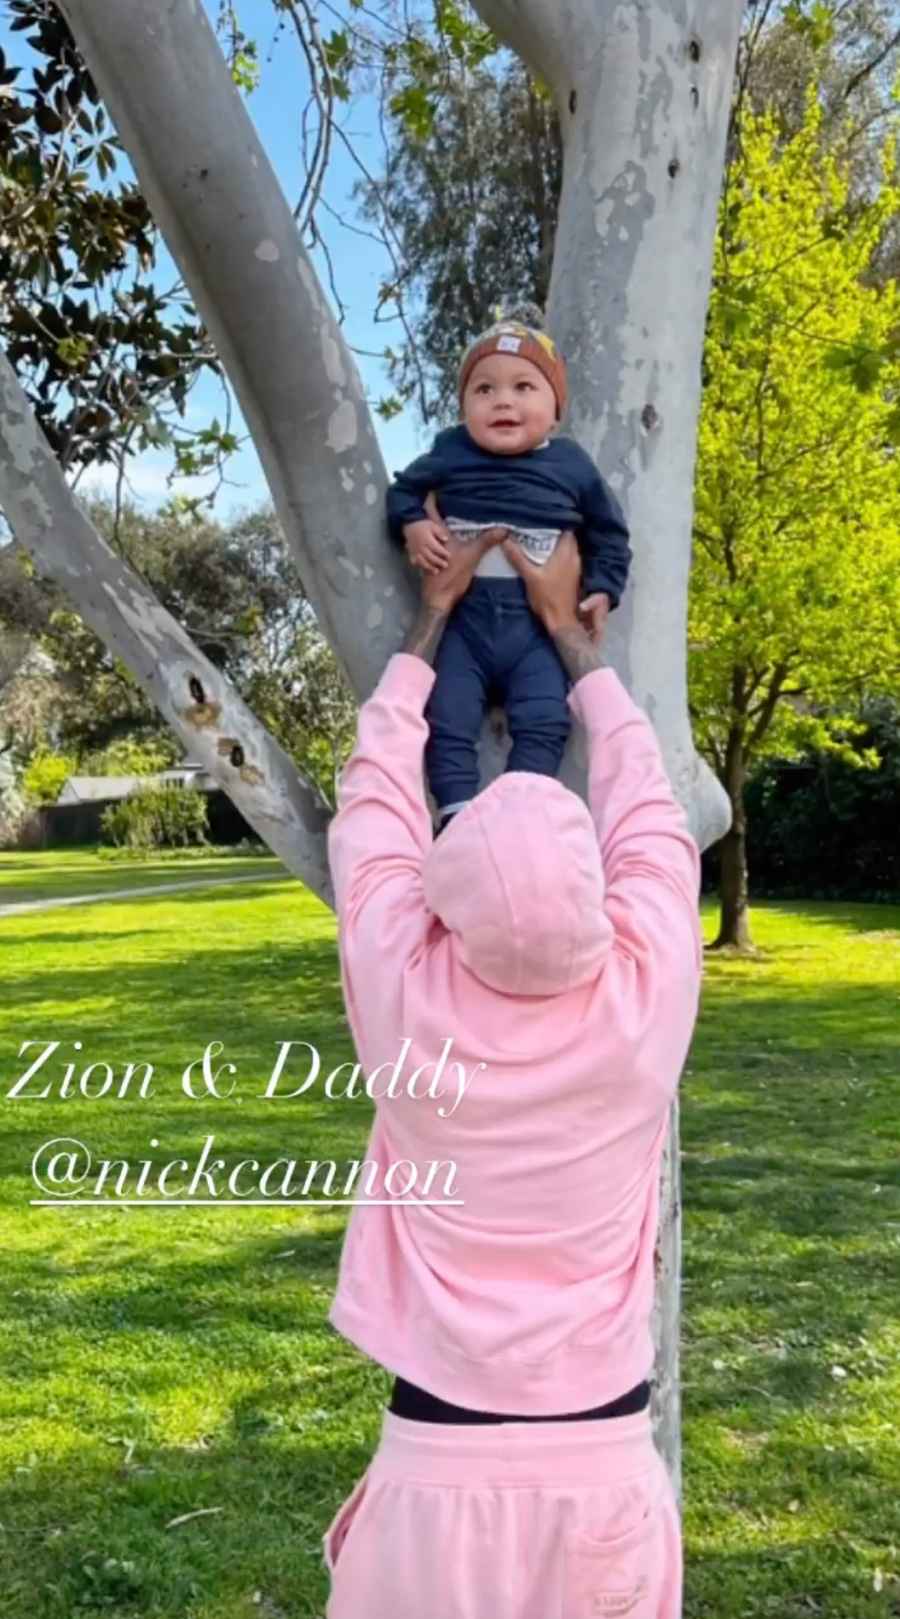 ‘Success’! Nick Cannon and Abby De La Rosa’s Twins Play at Park for 1st Time